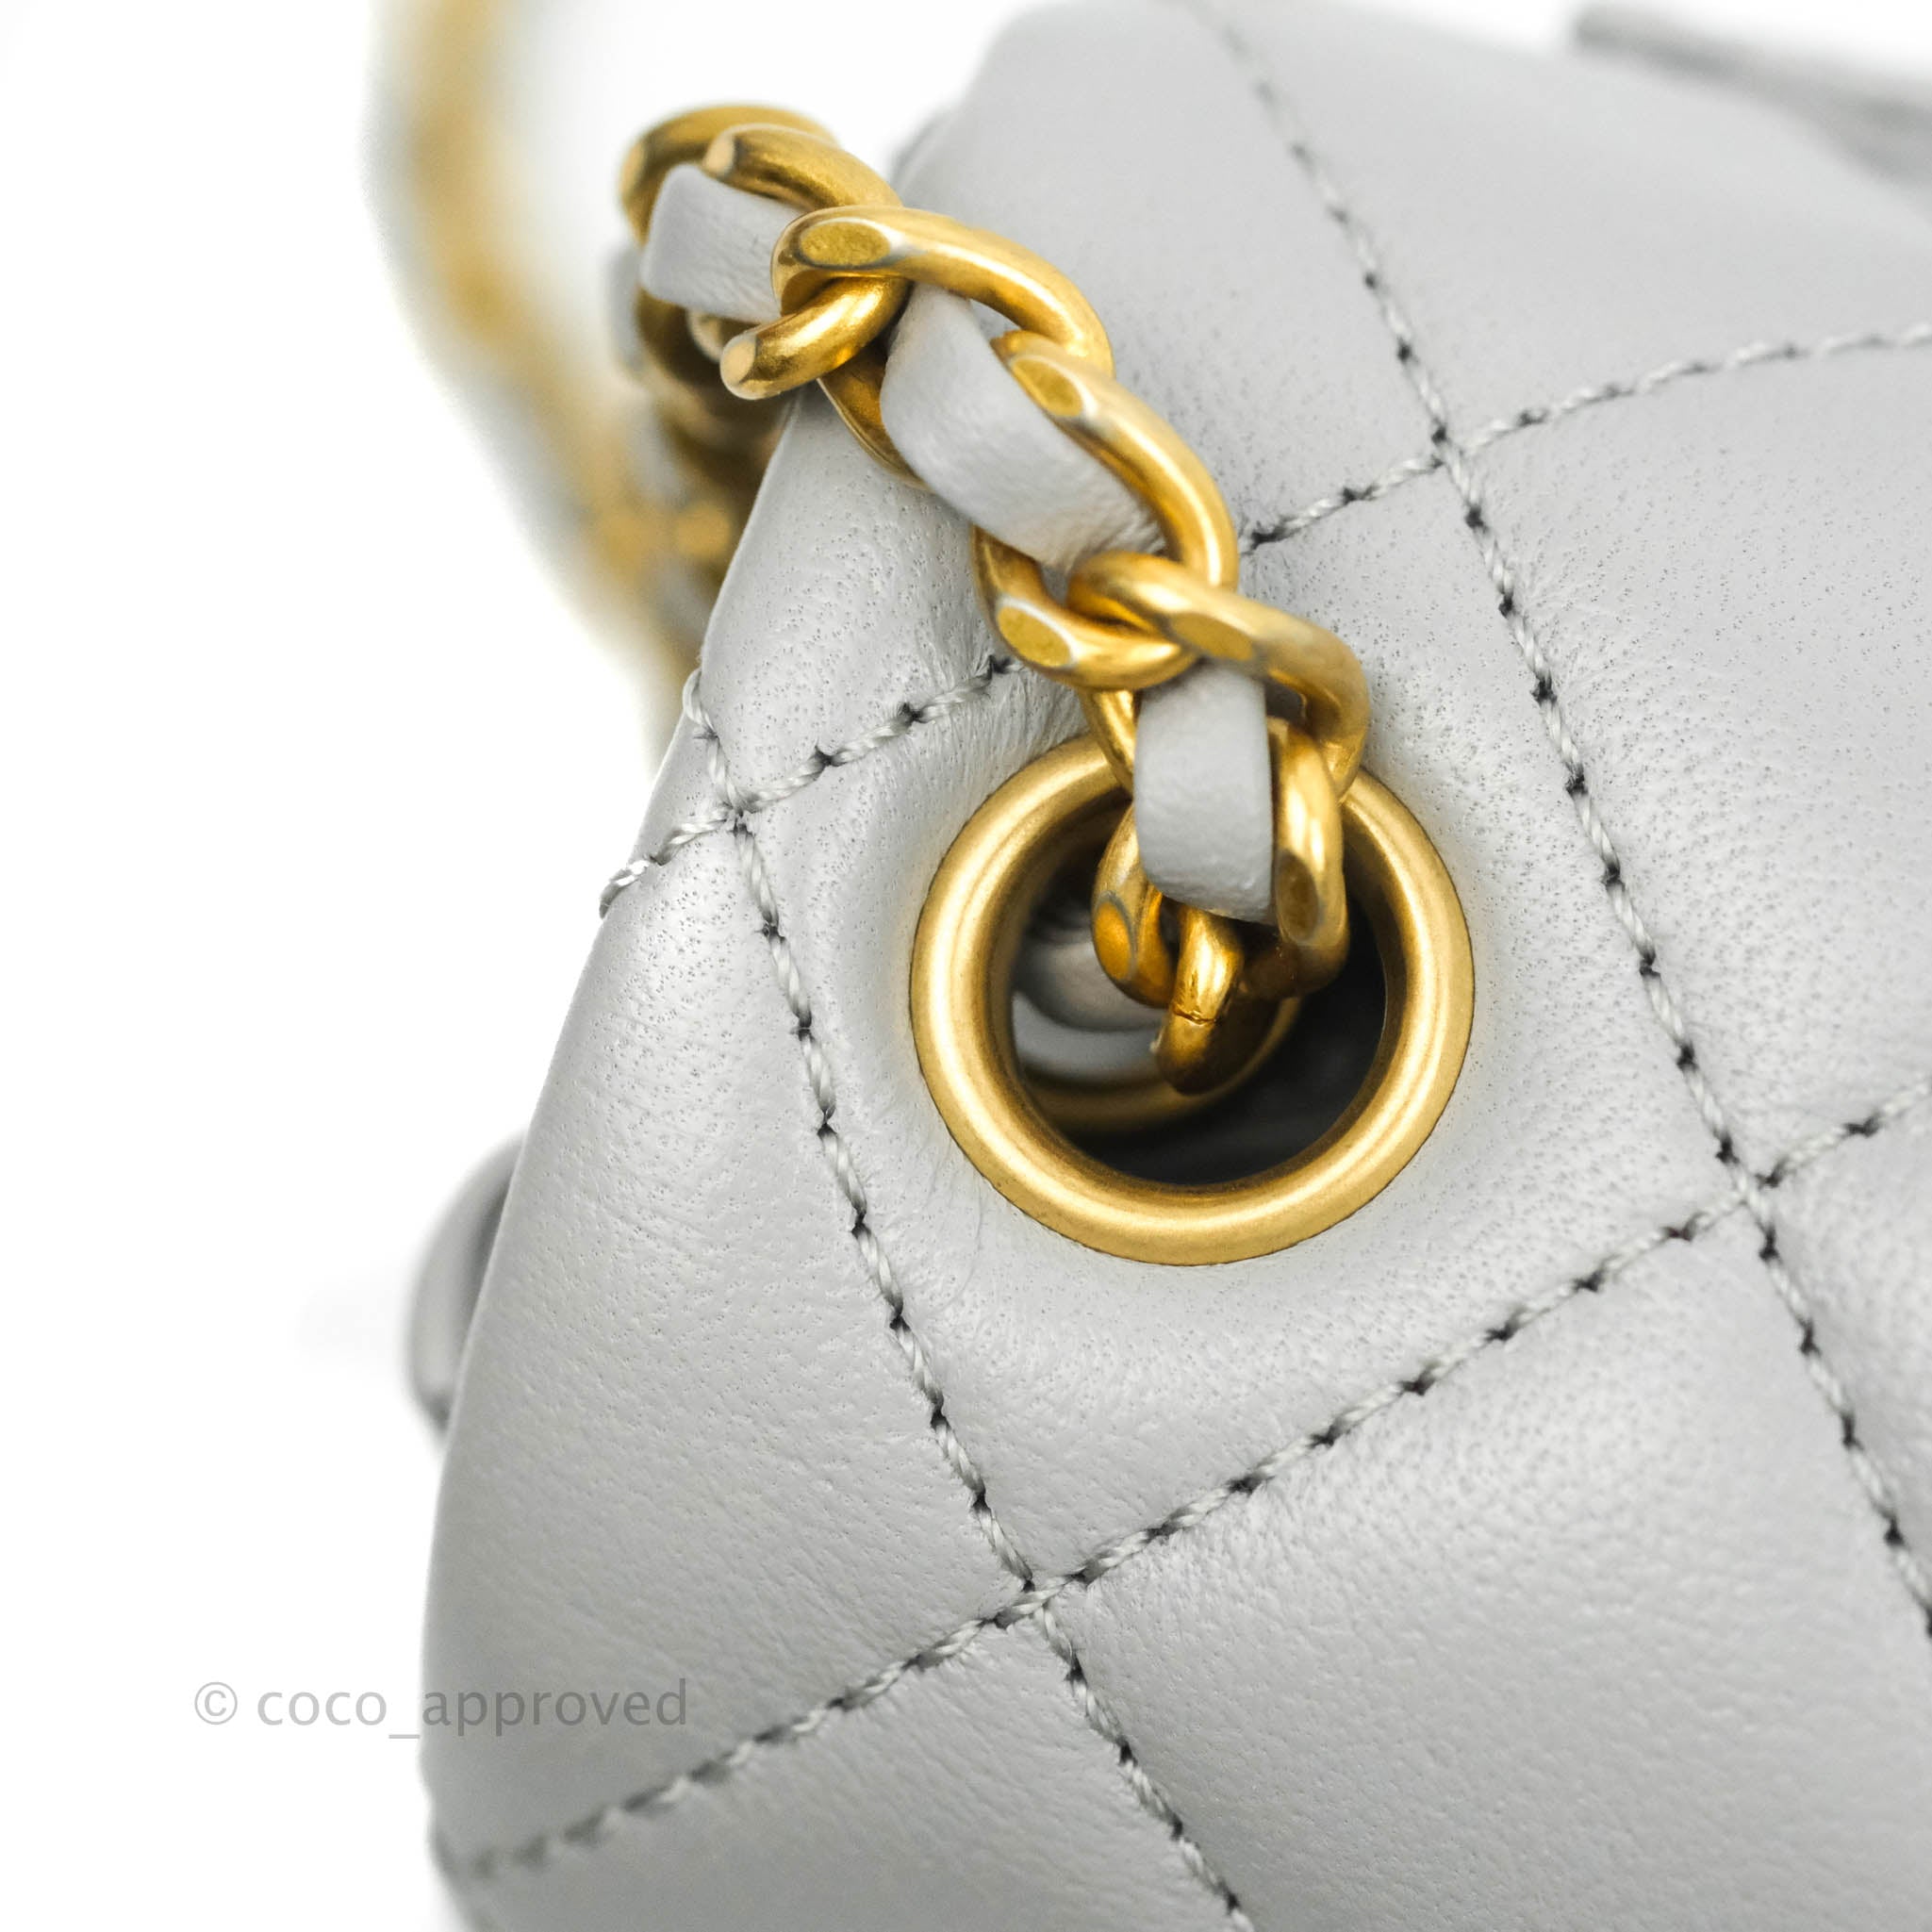 Chanel Mini Square Flap Bag With Pearl Crush Chain Beige - NOBLEMARS